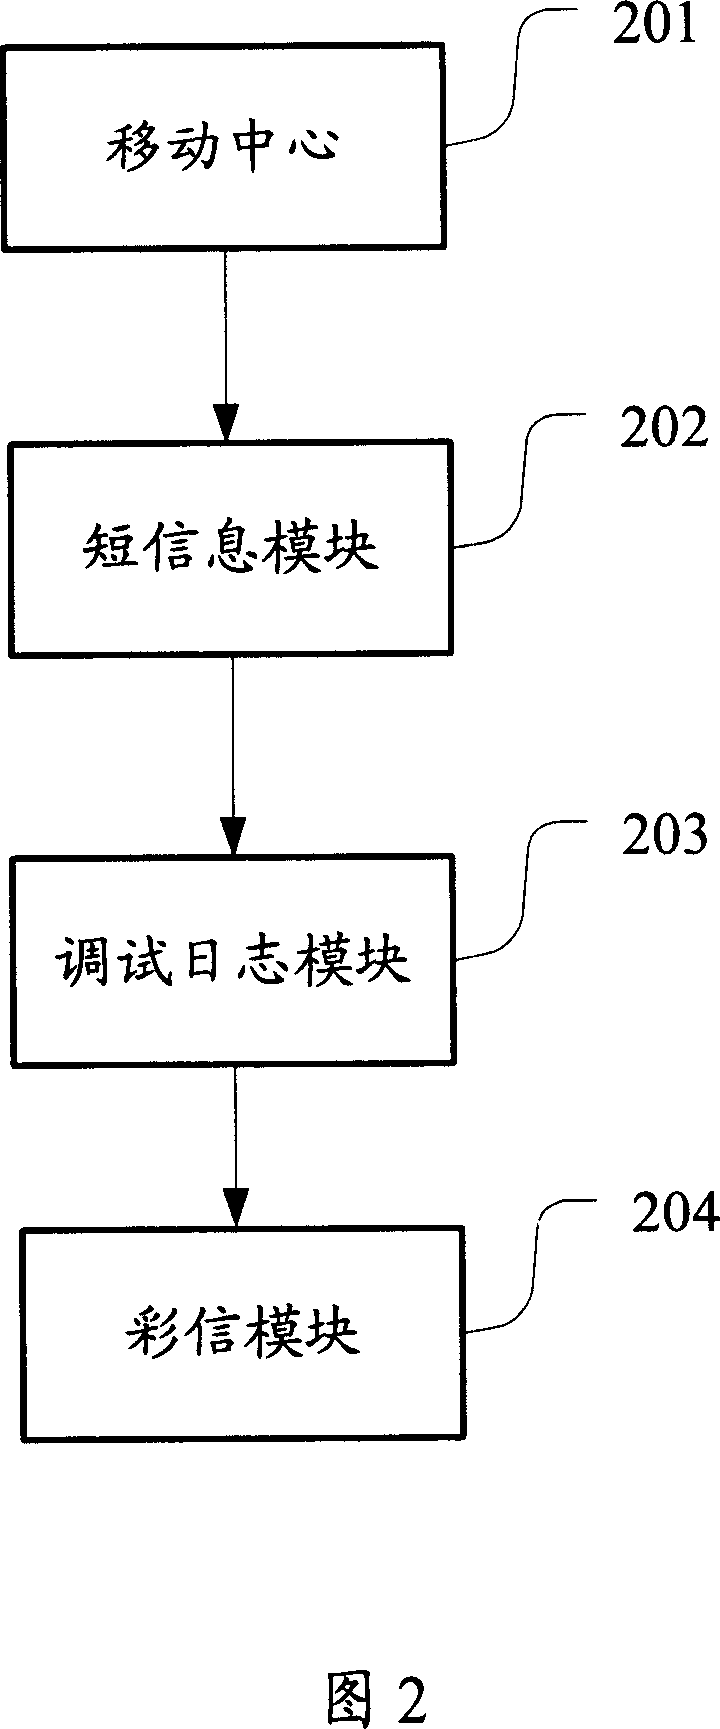 Method and system for collecting network optimizing needed data in mobile phone system